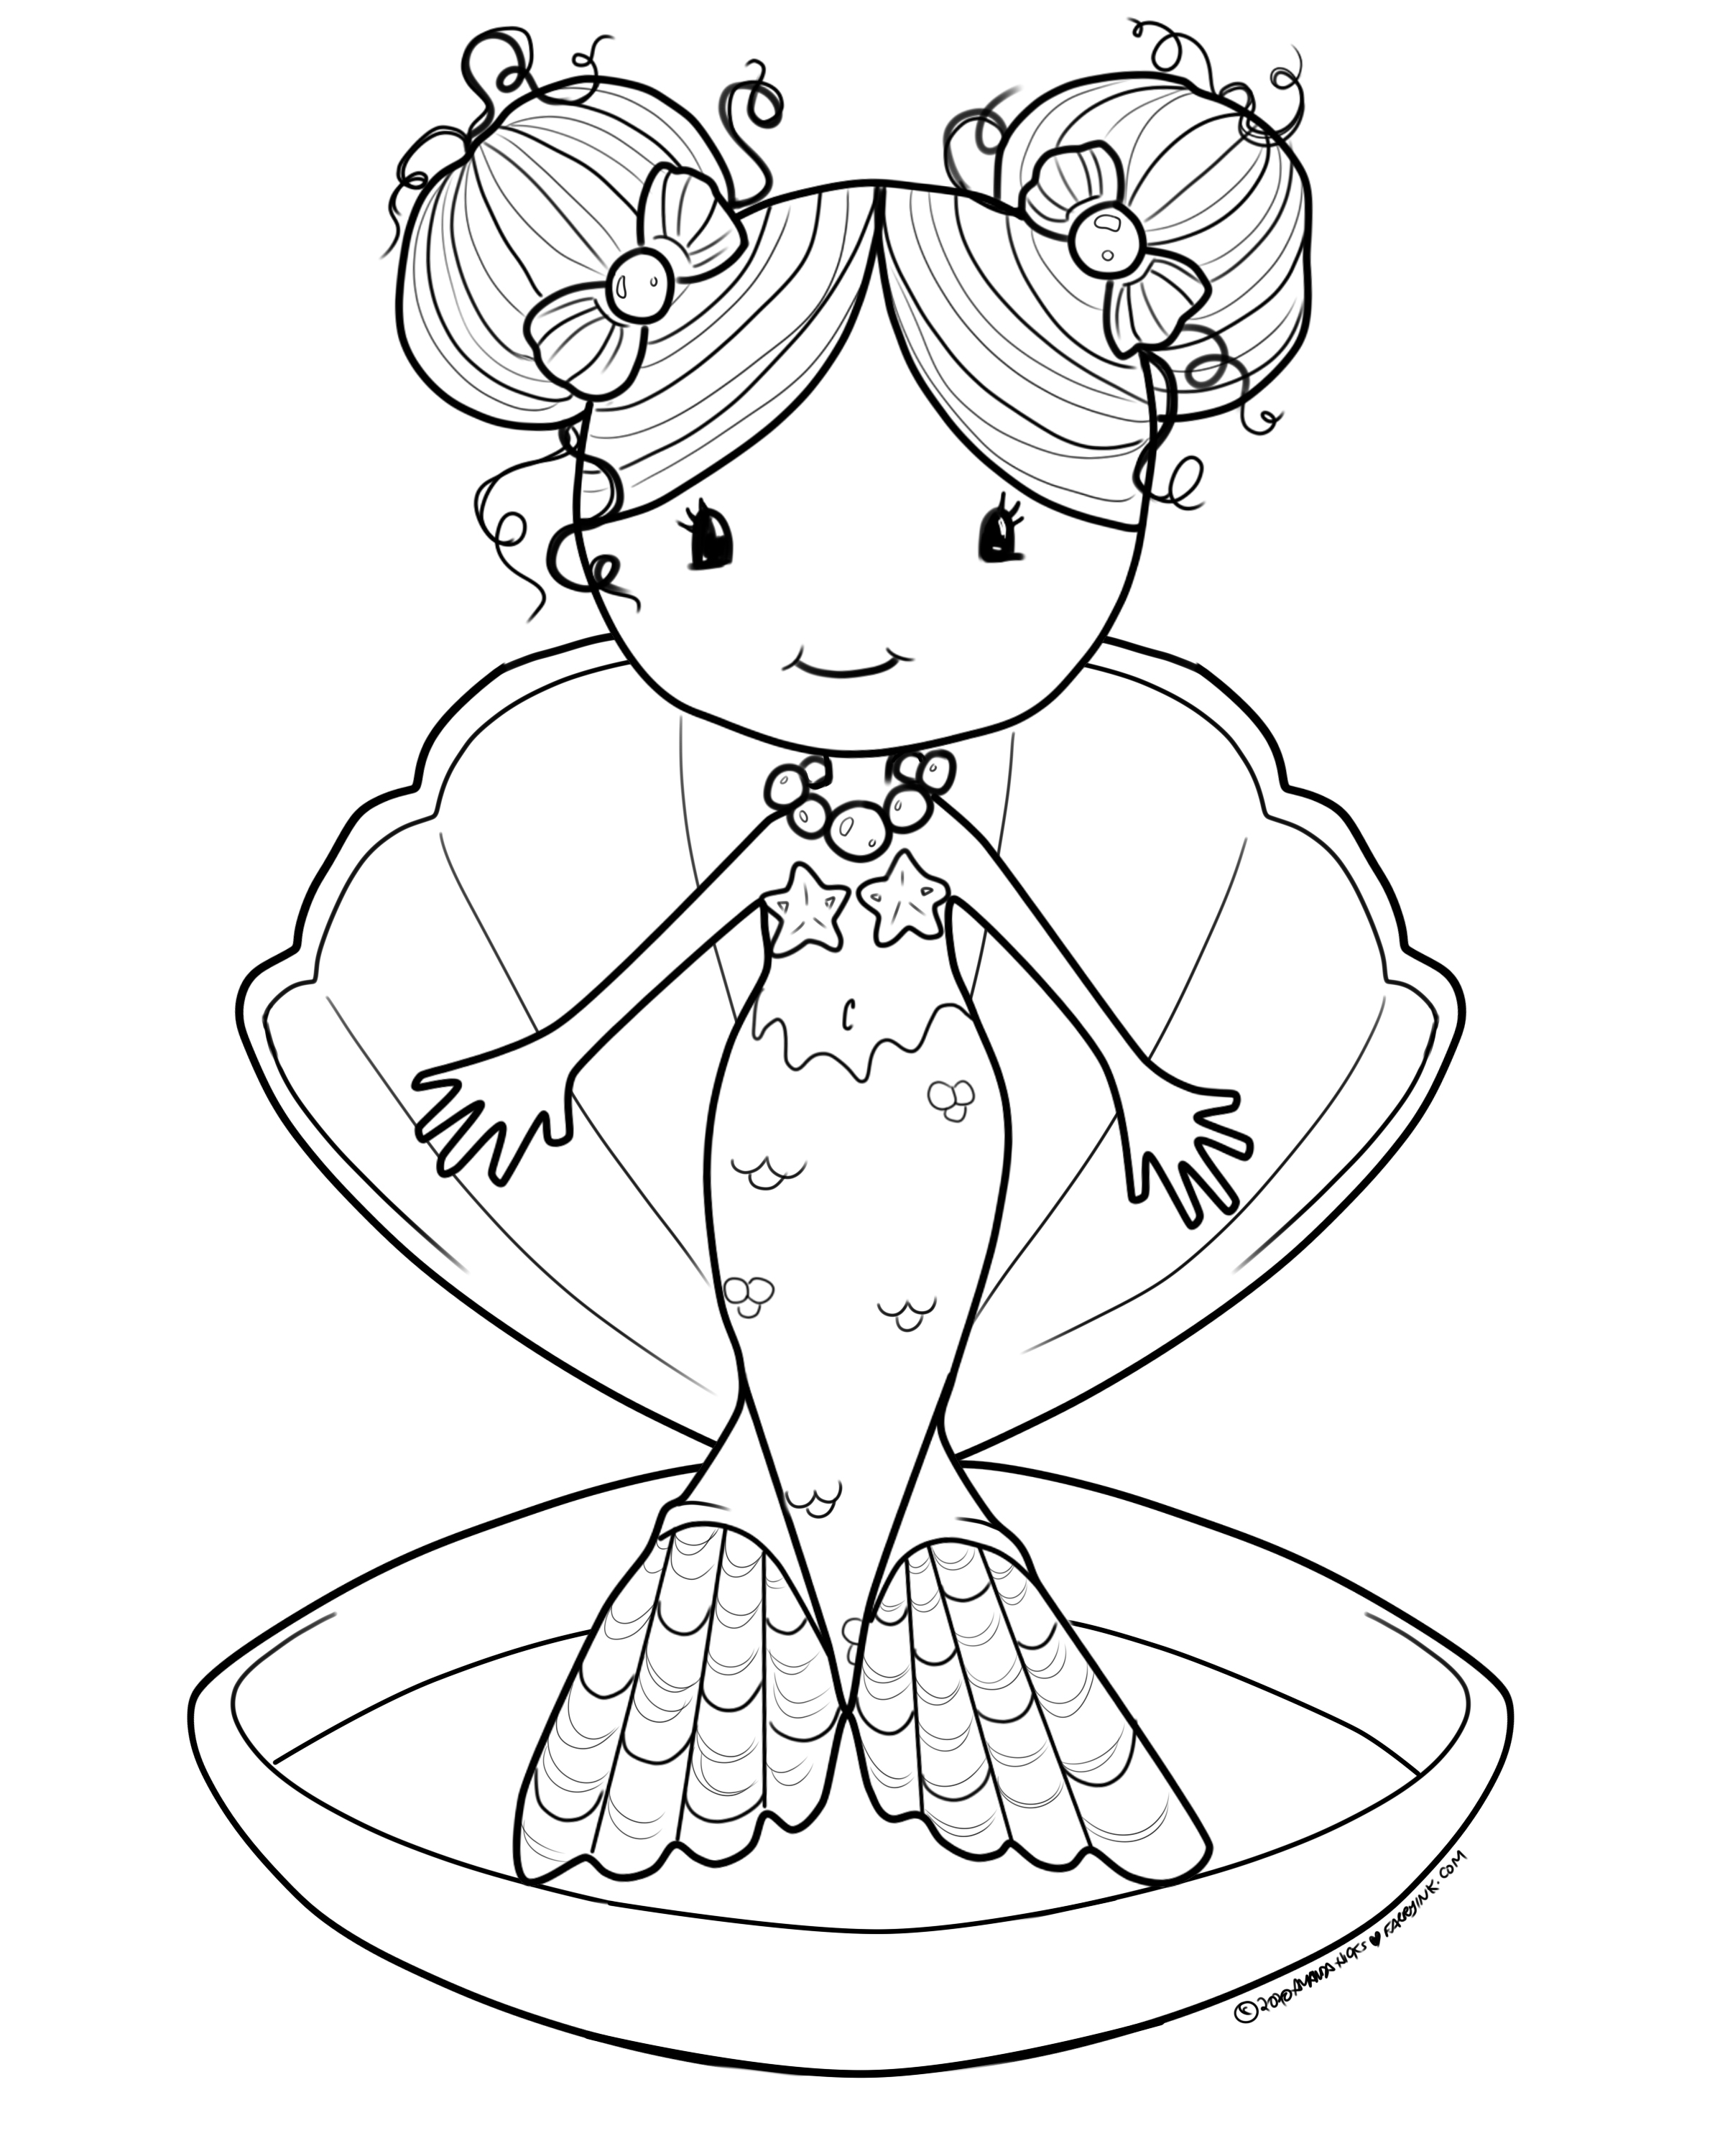 Free to Color Mermaid in a Clamshell